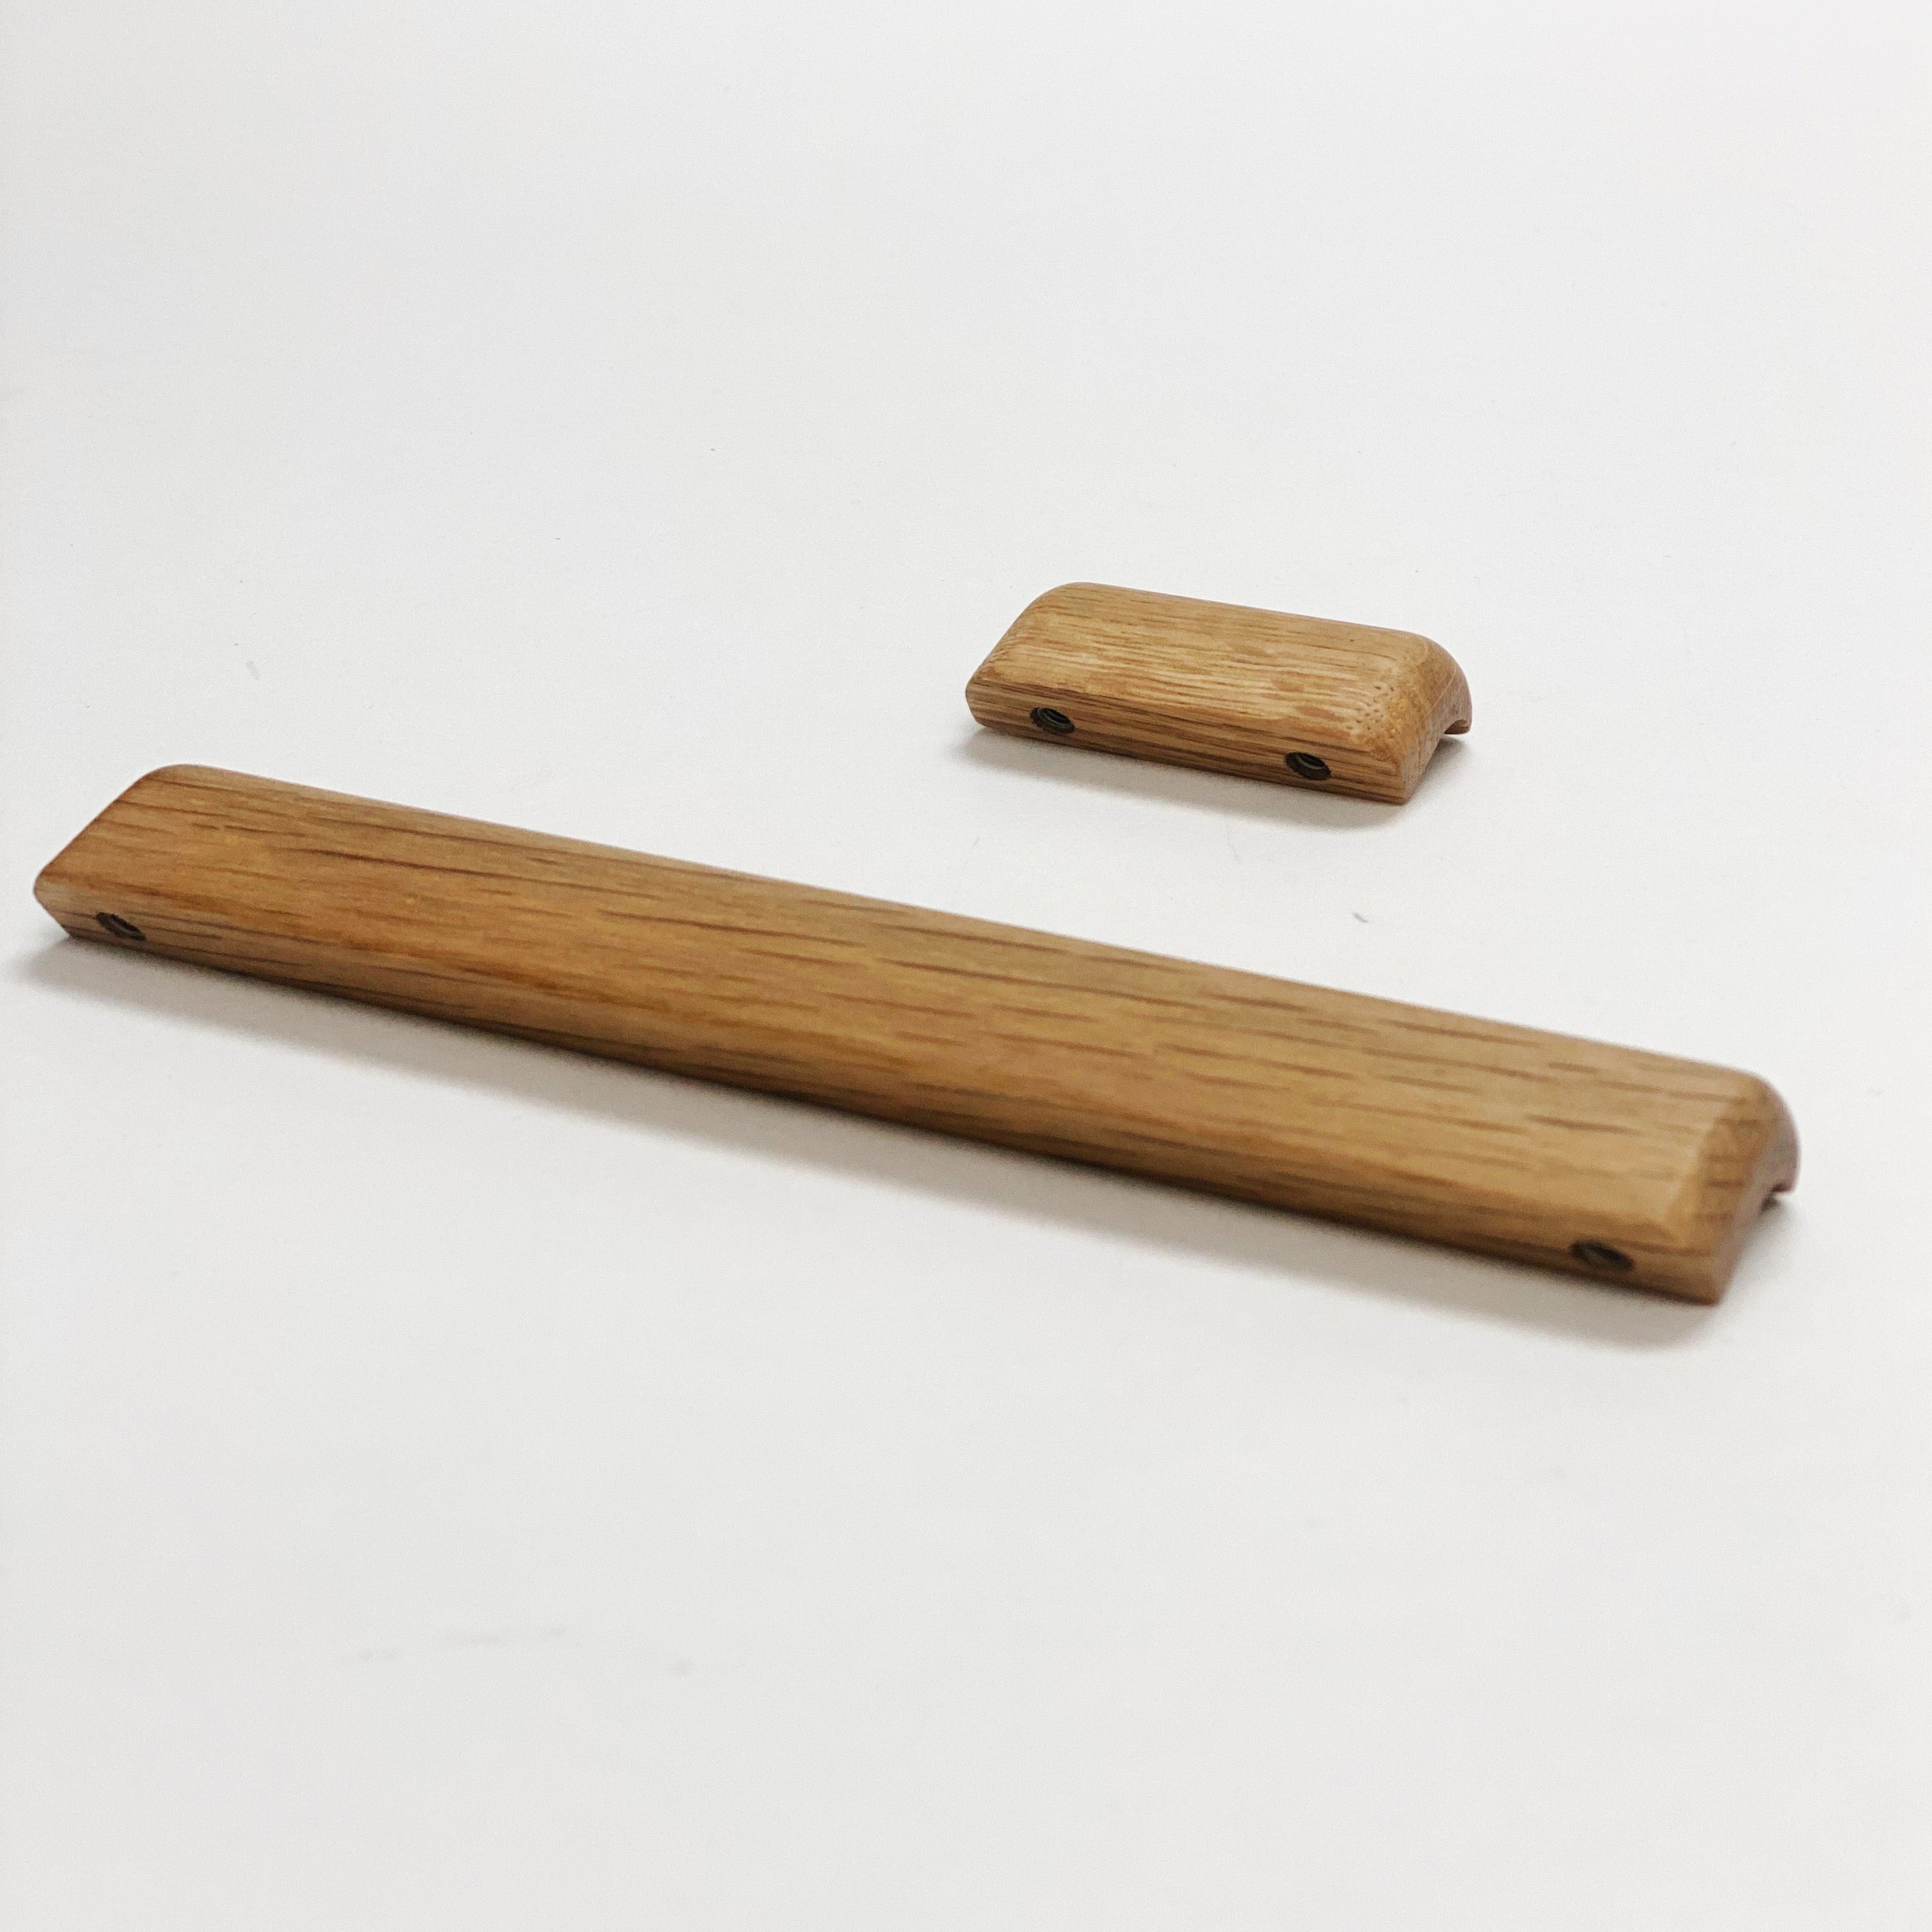 2x Natural Wood D-shaped Handles Pine and Oak Wood lacquered and  Unlacquered Finish 100mm 4'' Inch Pre Drilled Pair 